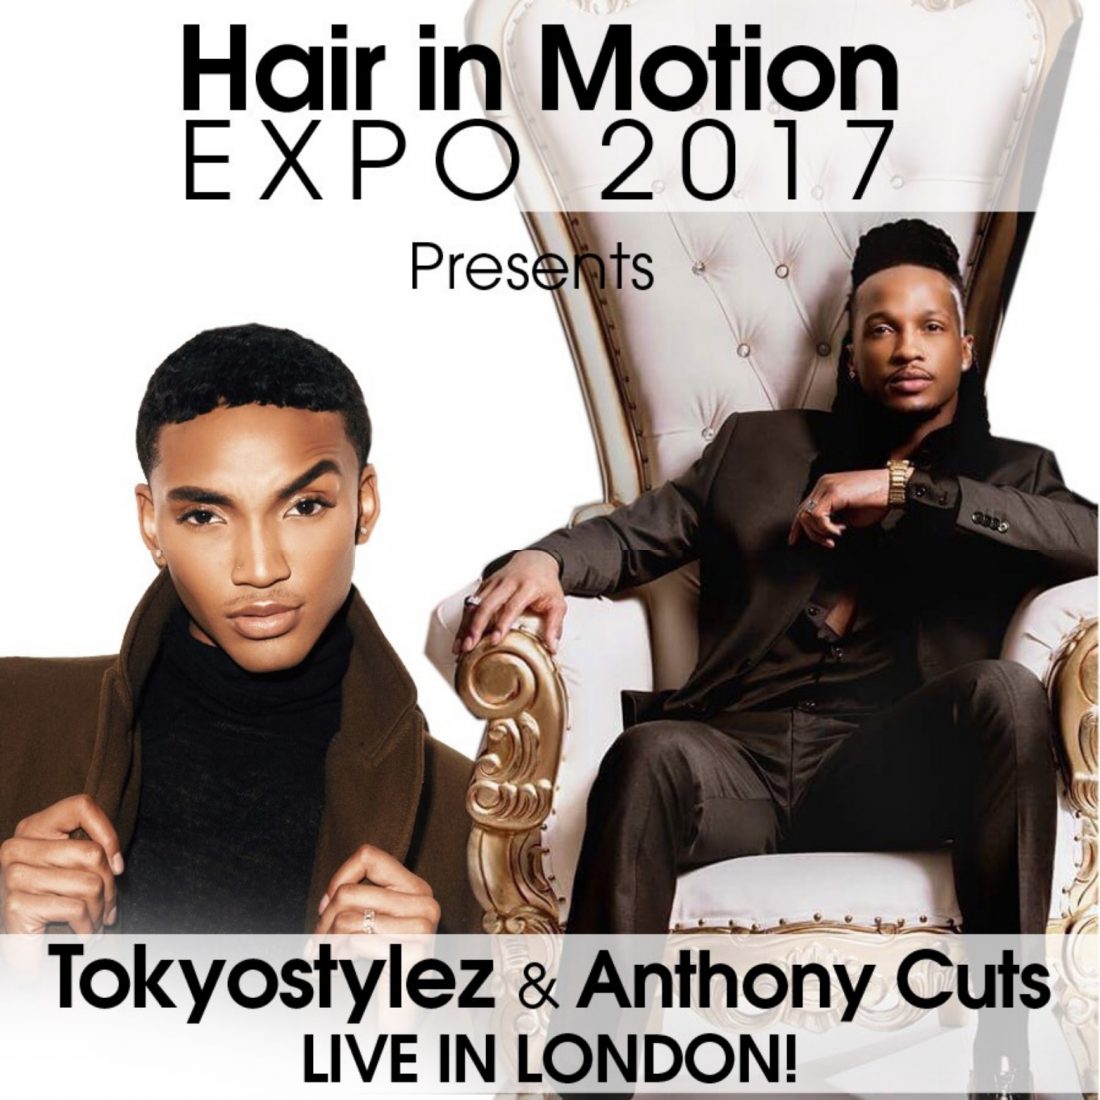 Celeb stylists Tokyo Stylez and Anthony Cuts headline Hair in Motion expo